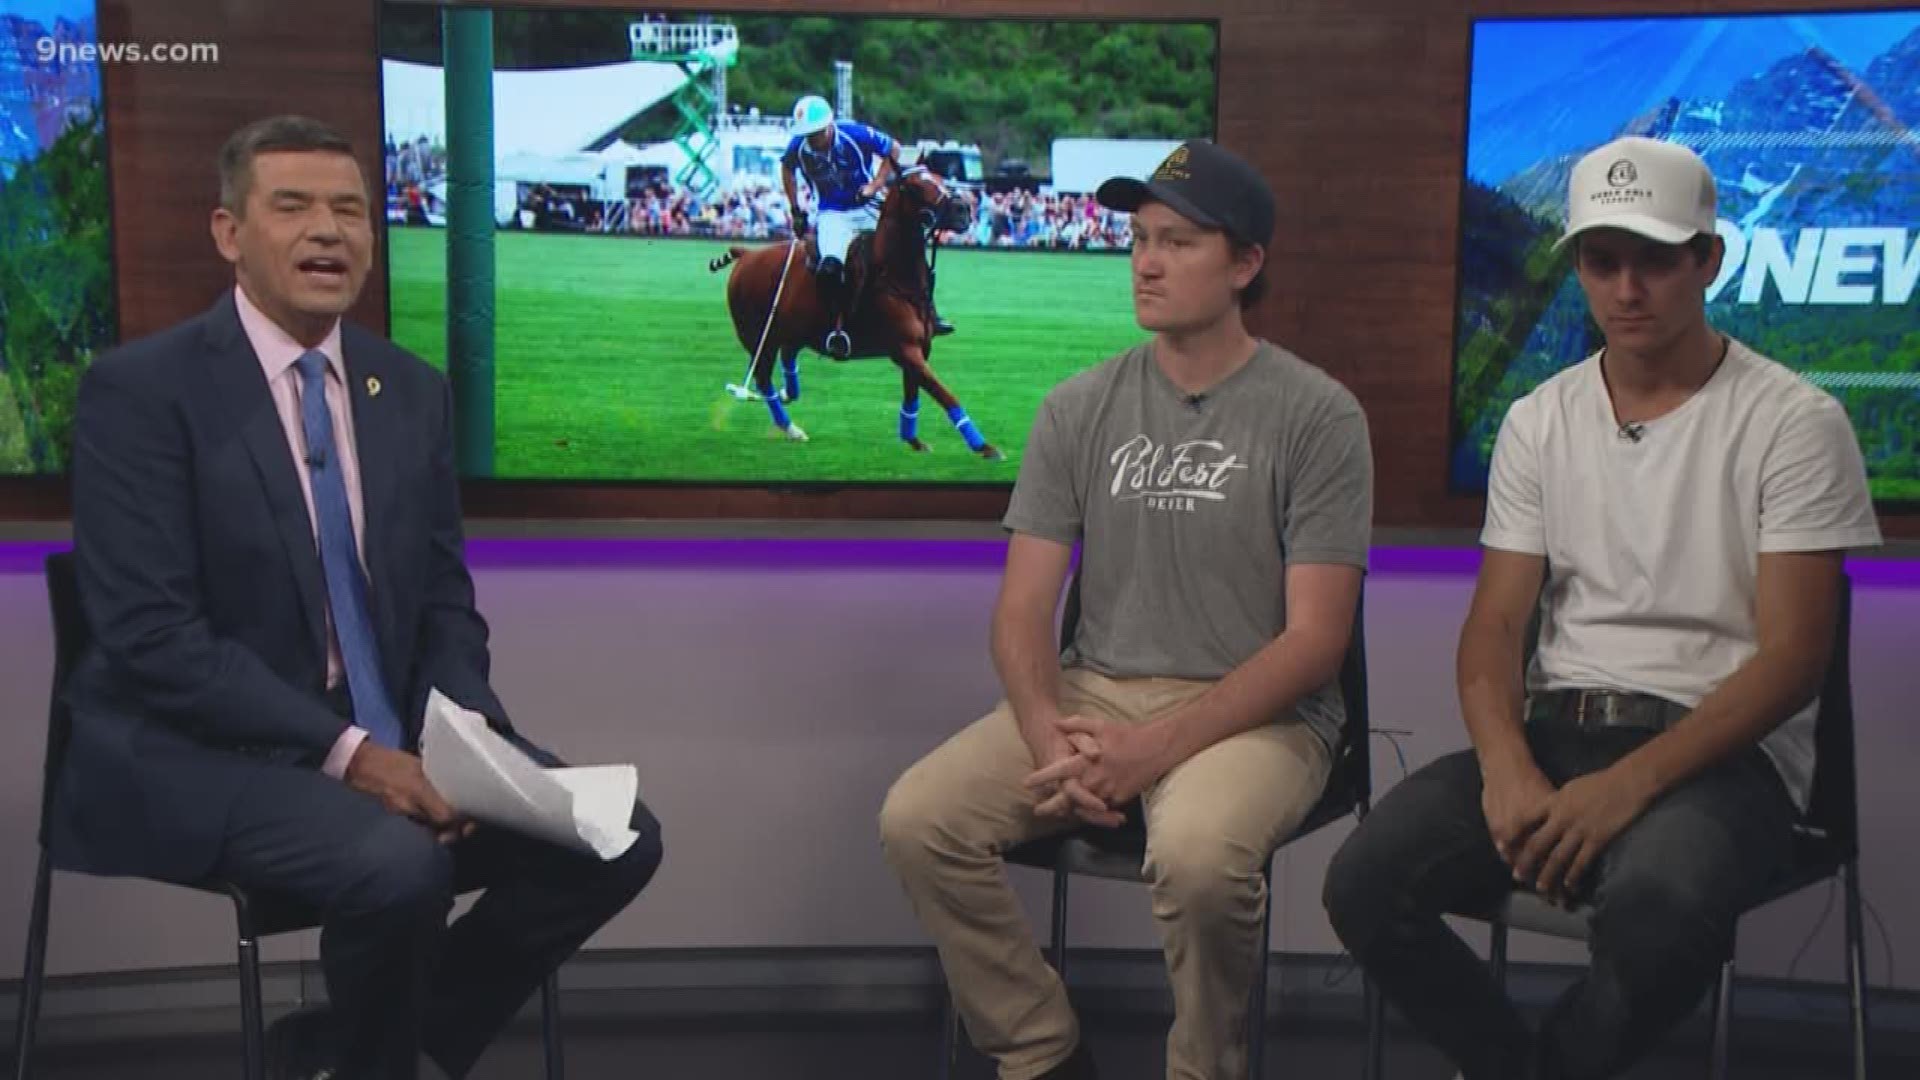 The "sport of kings" is headed to Denver to give people a chance to check out polo (and help out a great cause).